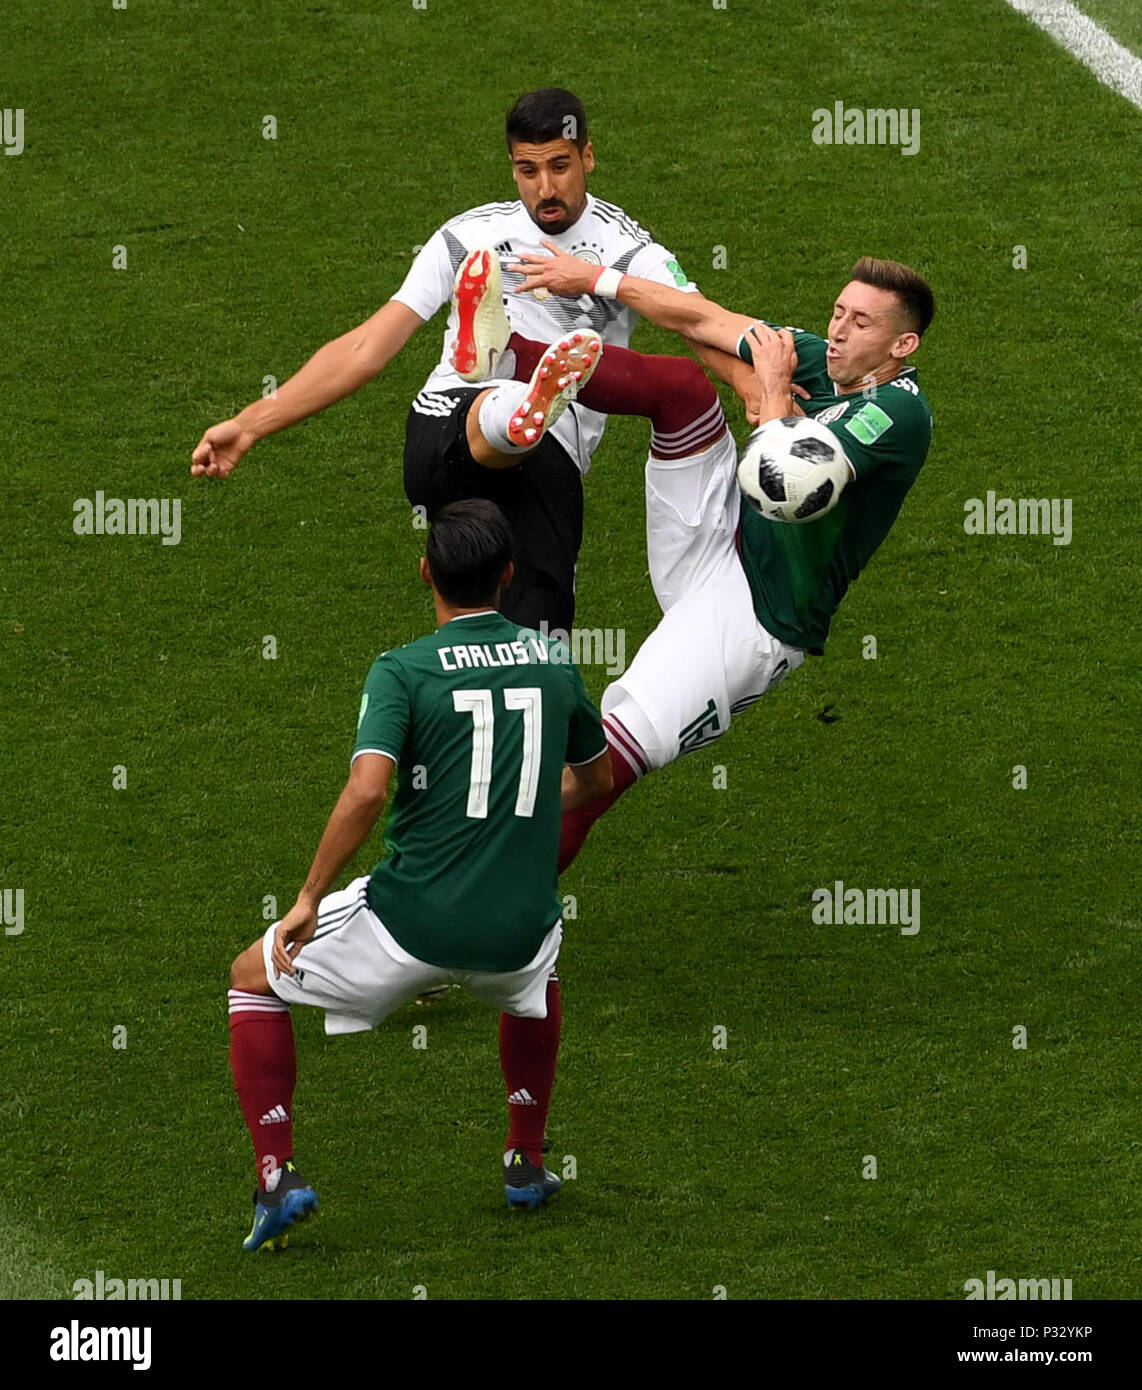 Moscow, Russia. 17th June, 2018. Sami Khedira (top) of Germany vies with Hector Herrera (R) of Mexico during a group F match between Germany and Mexico at the 2018 FIFA World Cup in Moscow, Russia, June 17, 2018. Credit: Wang Yuguo/Xinhua/Alamy Live News Stock Photo